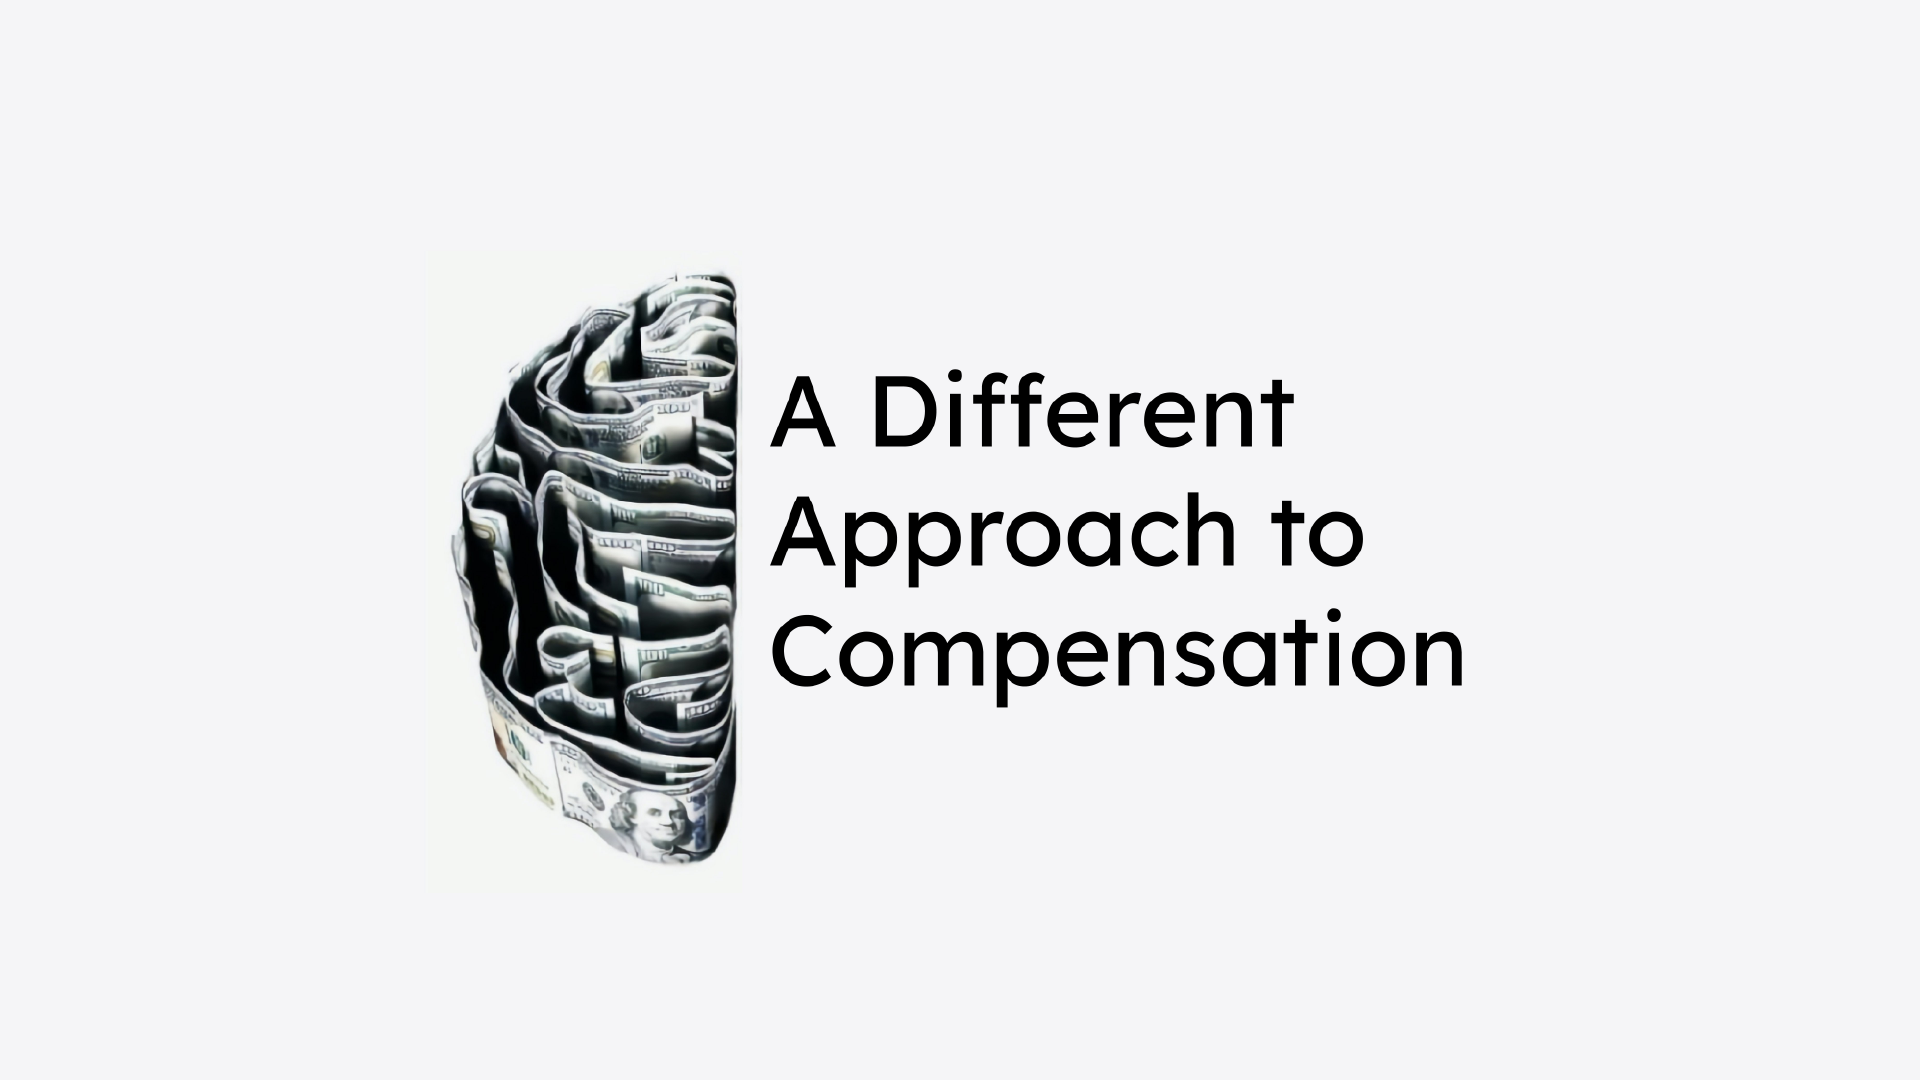 A Different Approach to Compensation